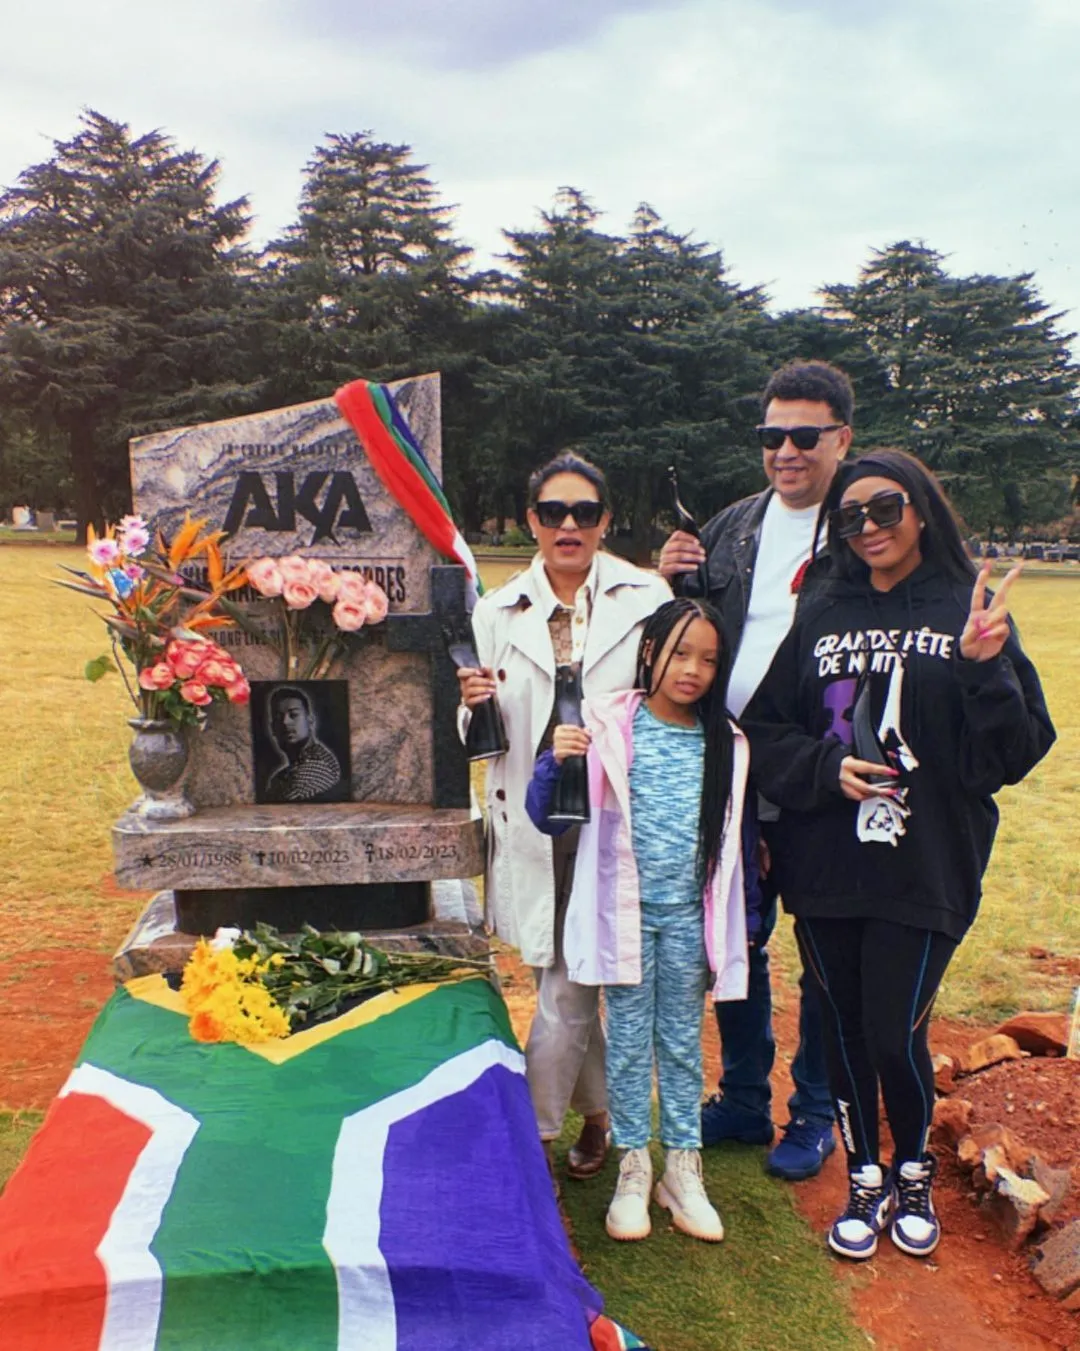 The Forbes Family Visit AKA’s Grave After 4 MMA wins